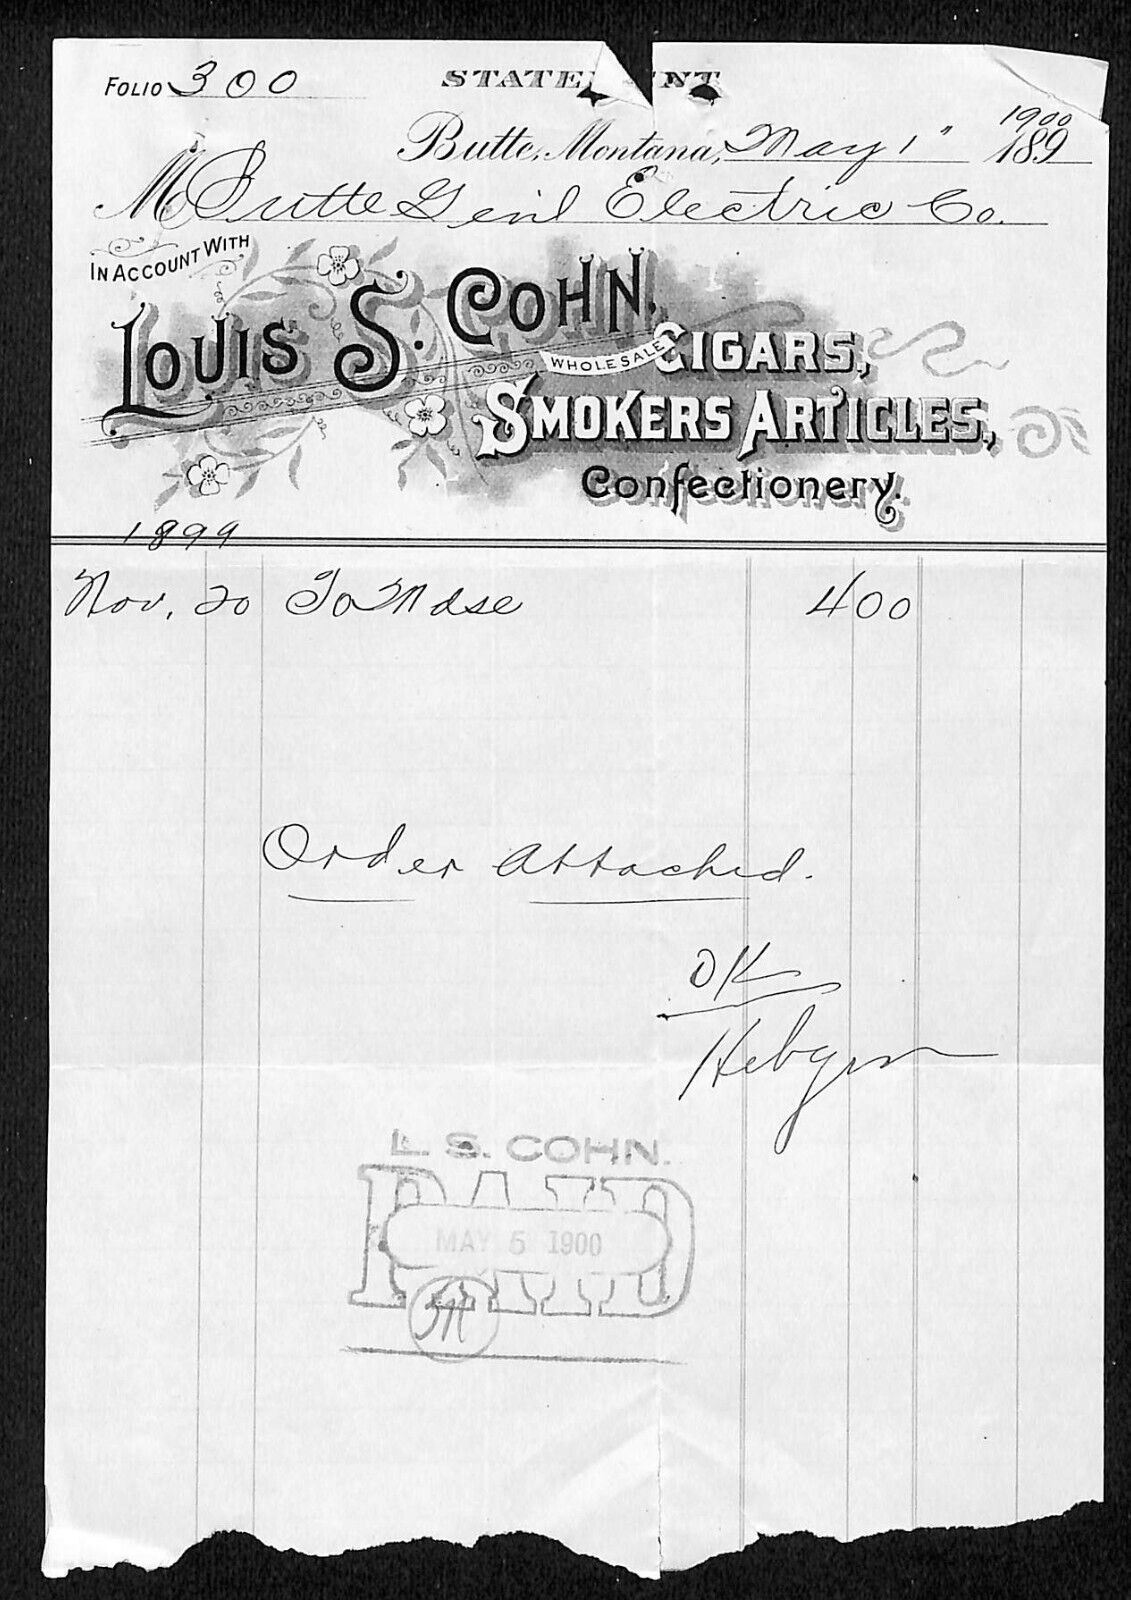 Butte, MT Louis S. Cohn Cigars Smokers Articles Confectionery 1900 Billhead